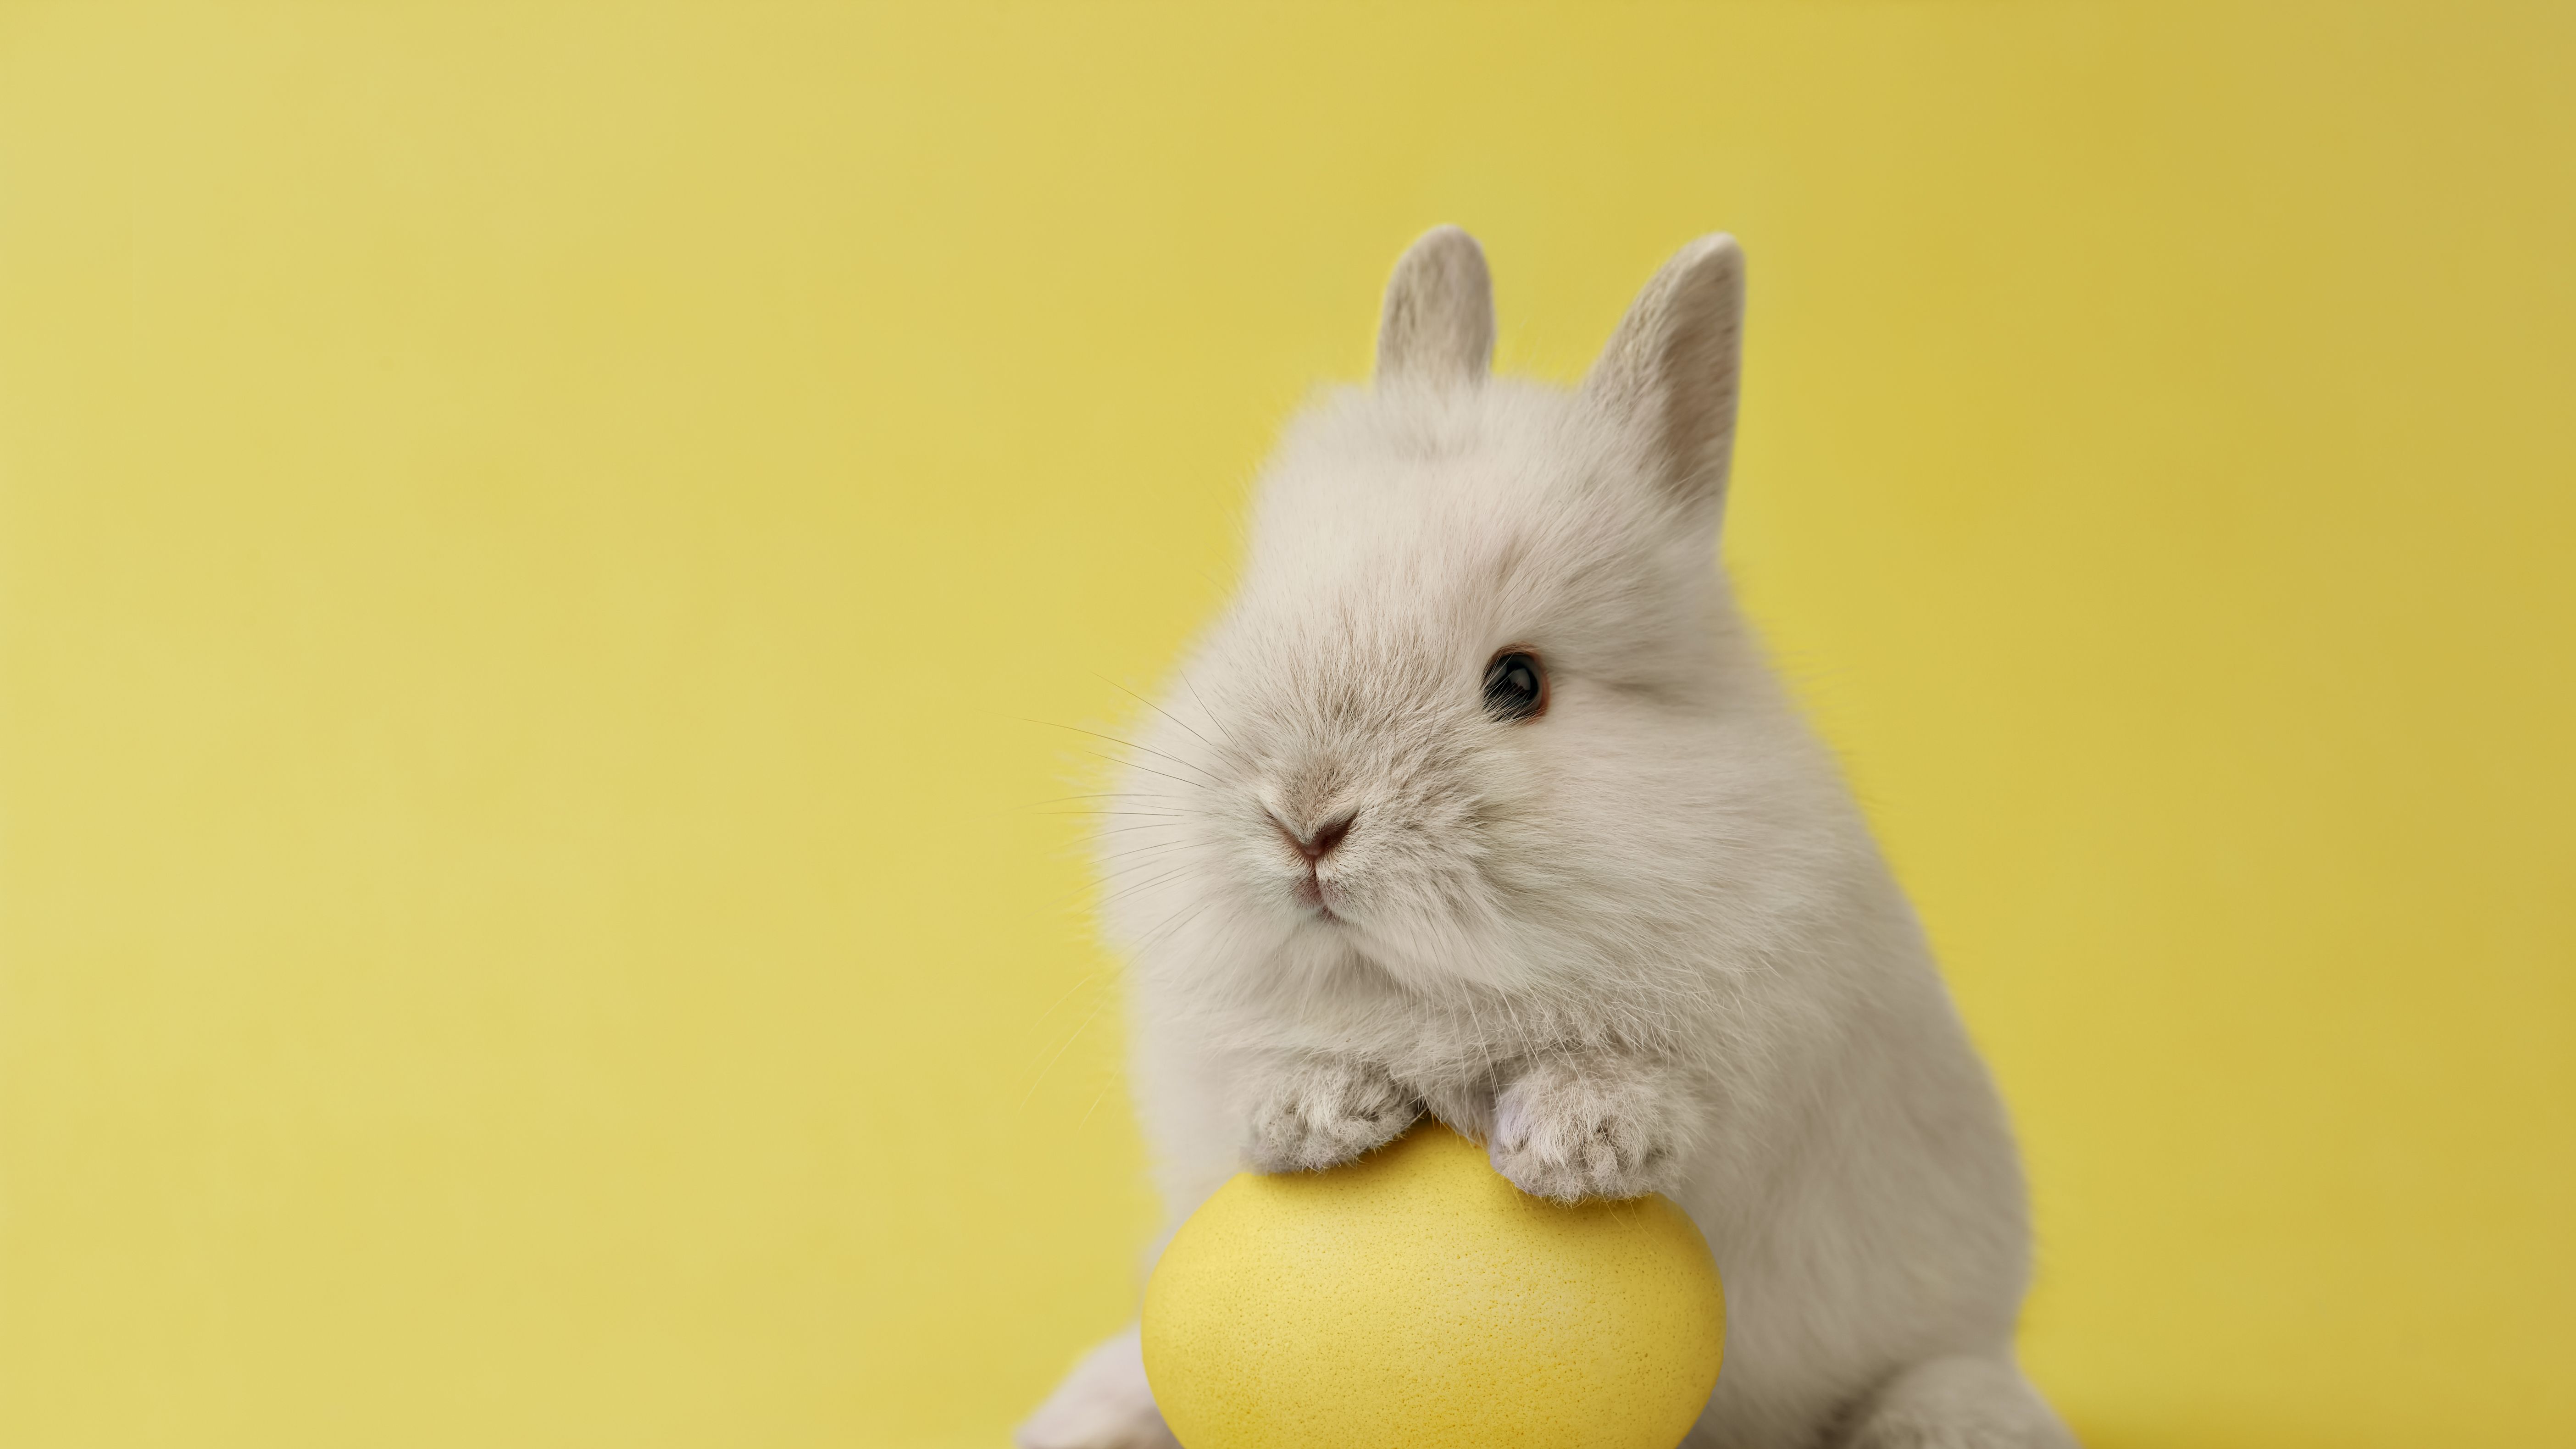 https://hips.hearstapps.com/hmg-prod/images/easter-bunny-with-egg-on-yellow-background-royalty-free-image-1614715381.?crop=1xw:0.84375xh;center,top